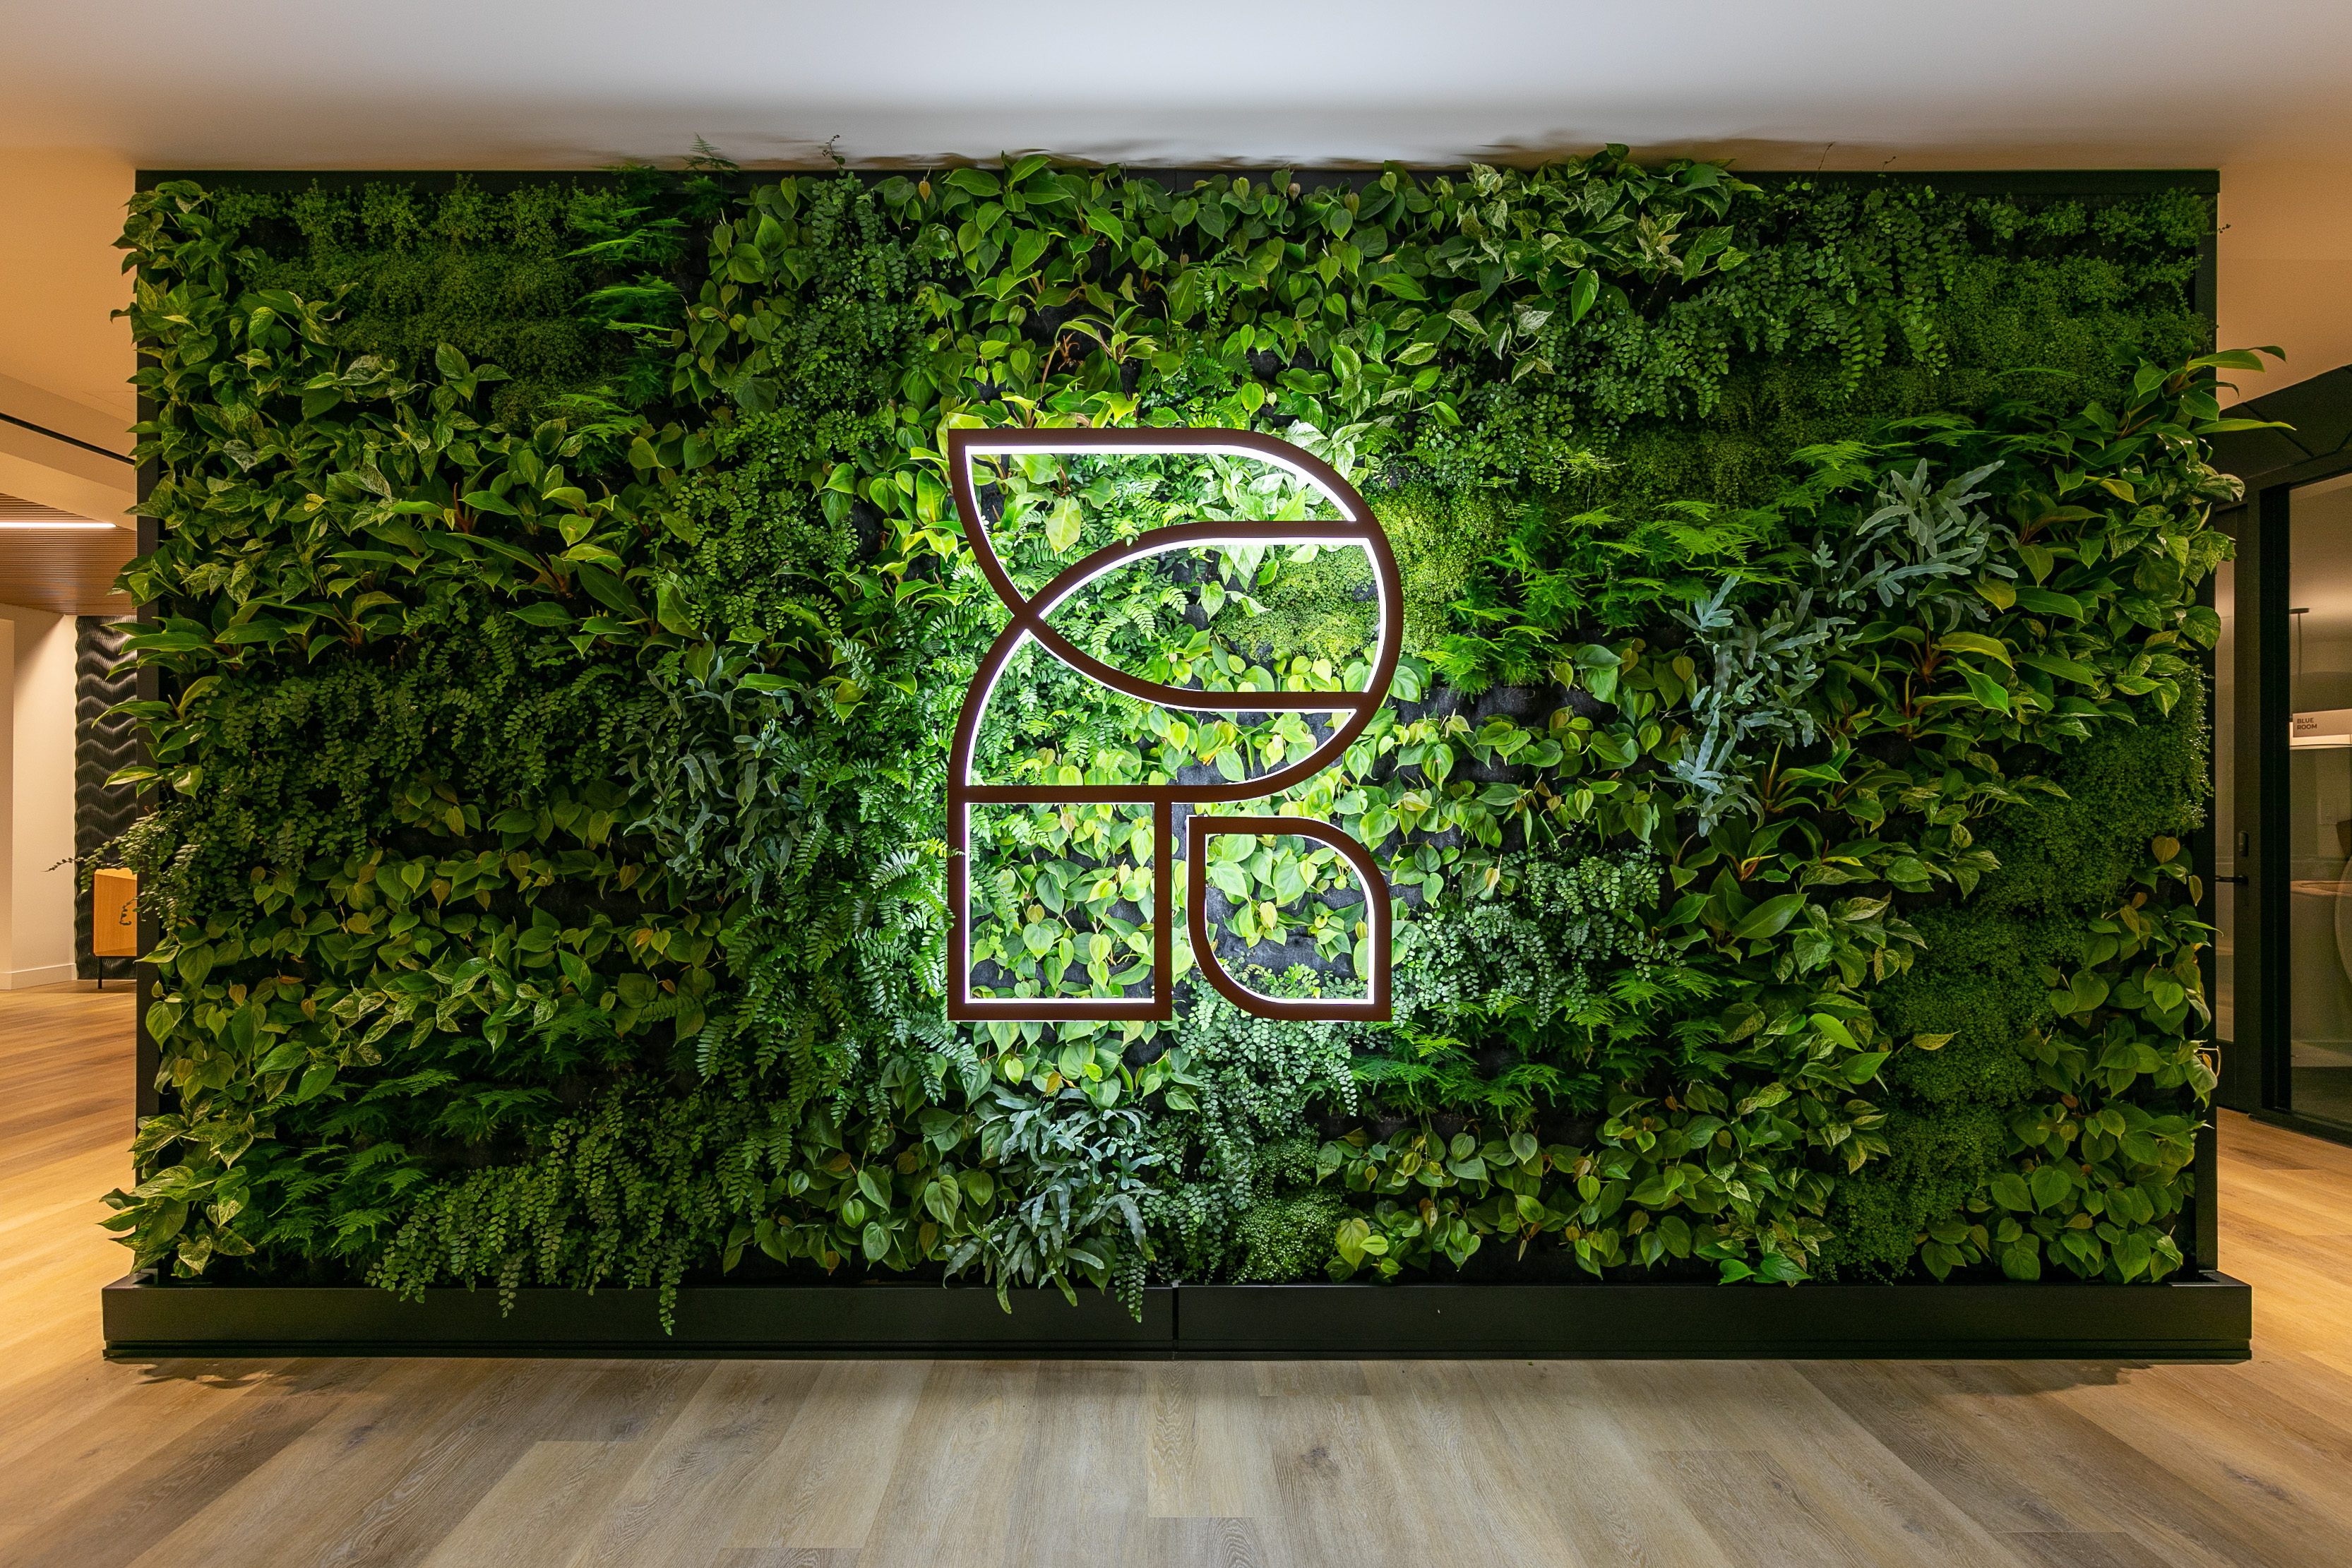 A green wall in a multifamily apartment with a logo on it.